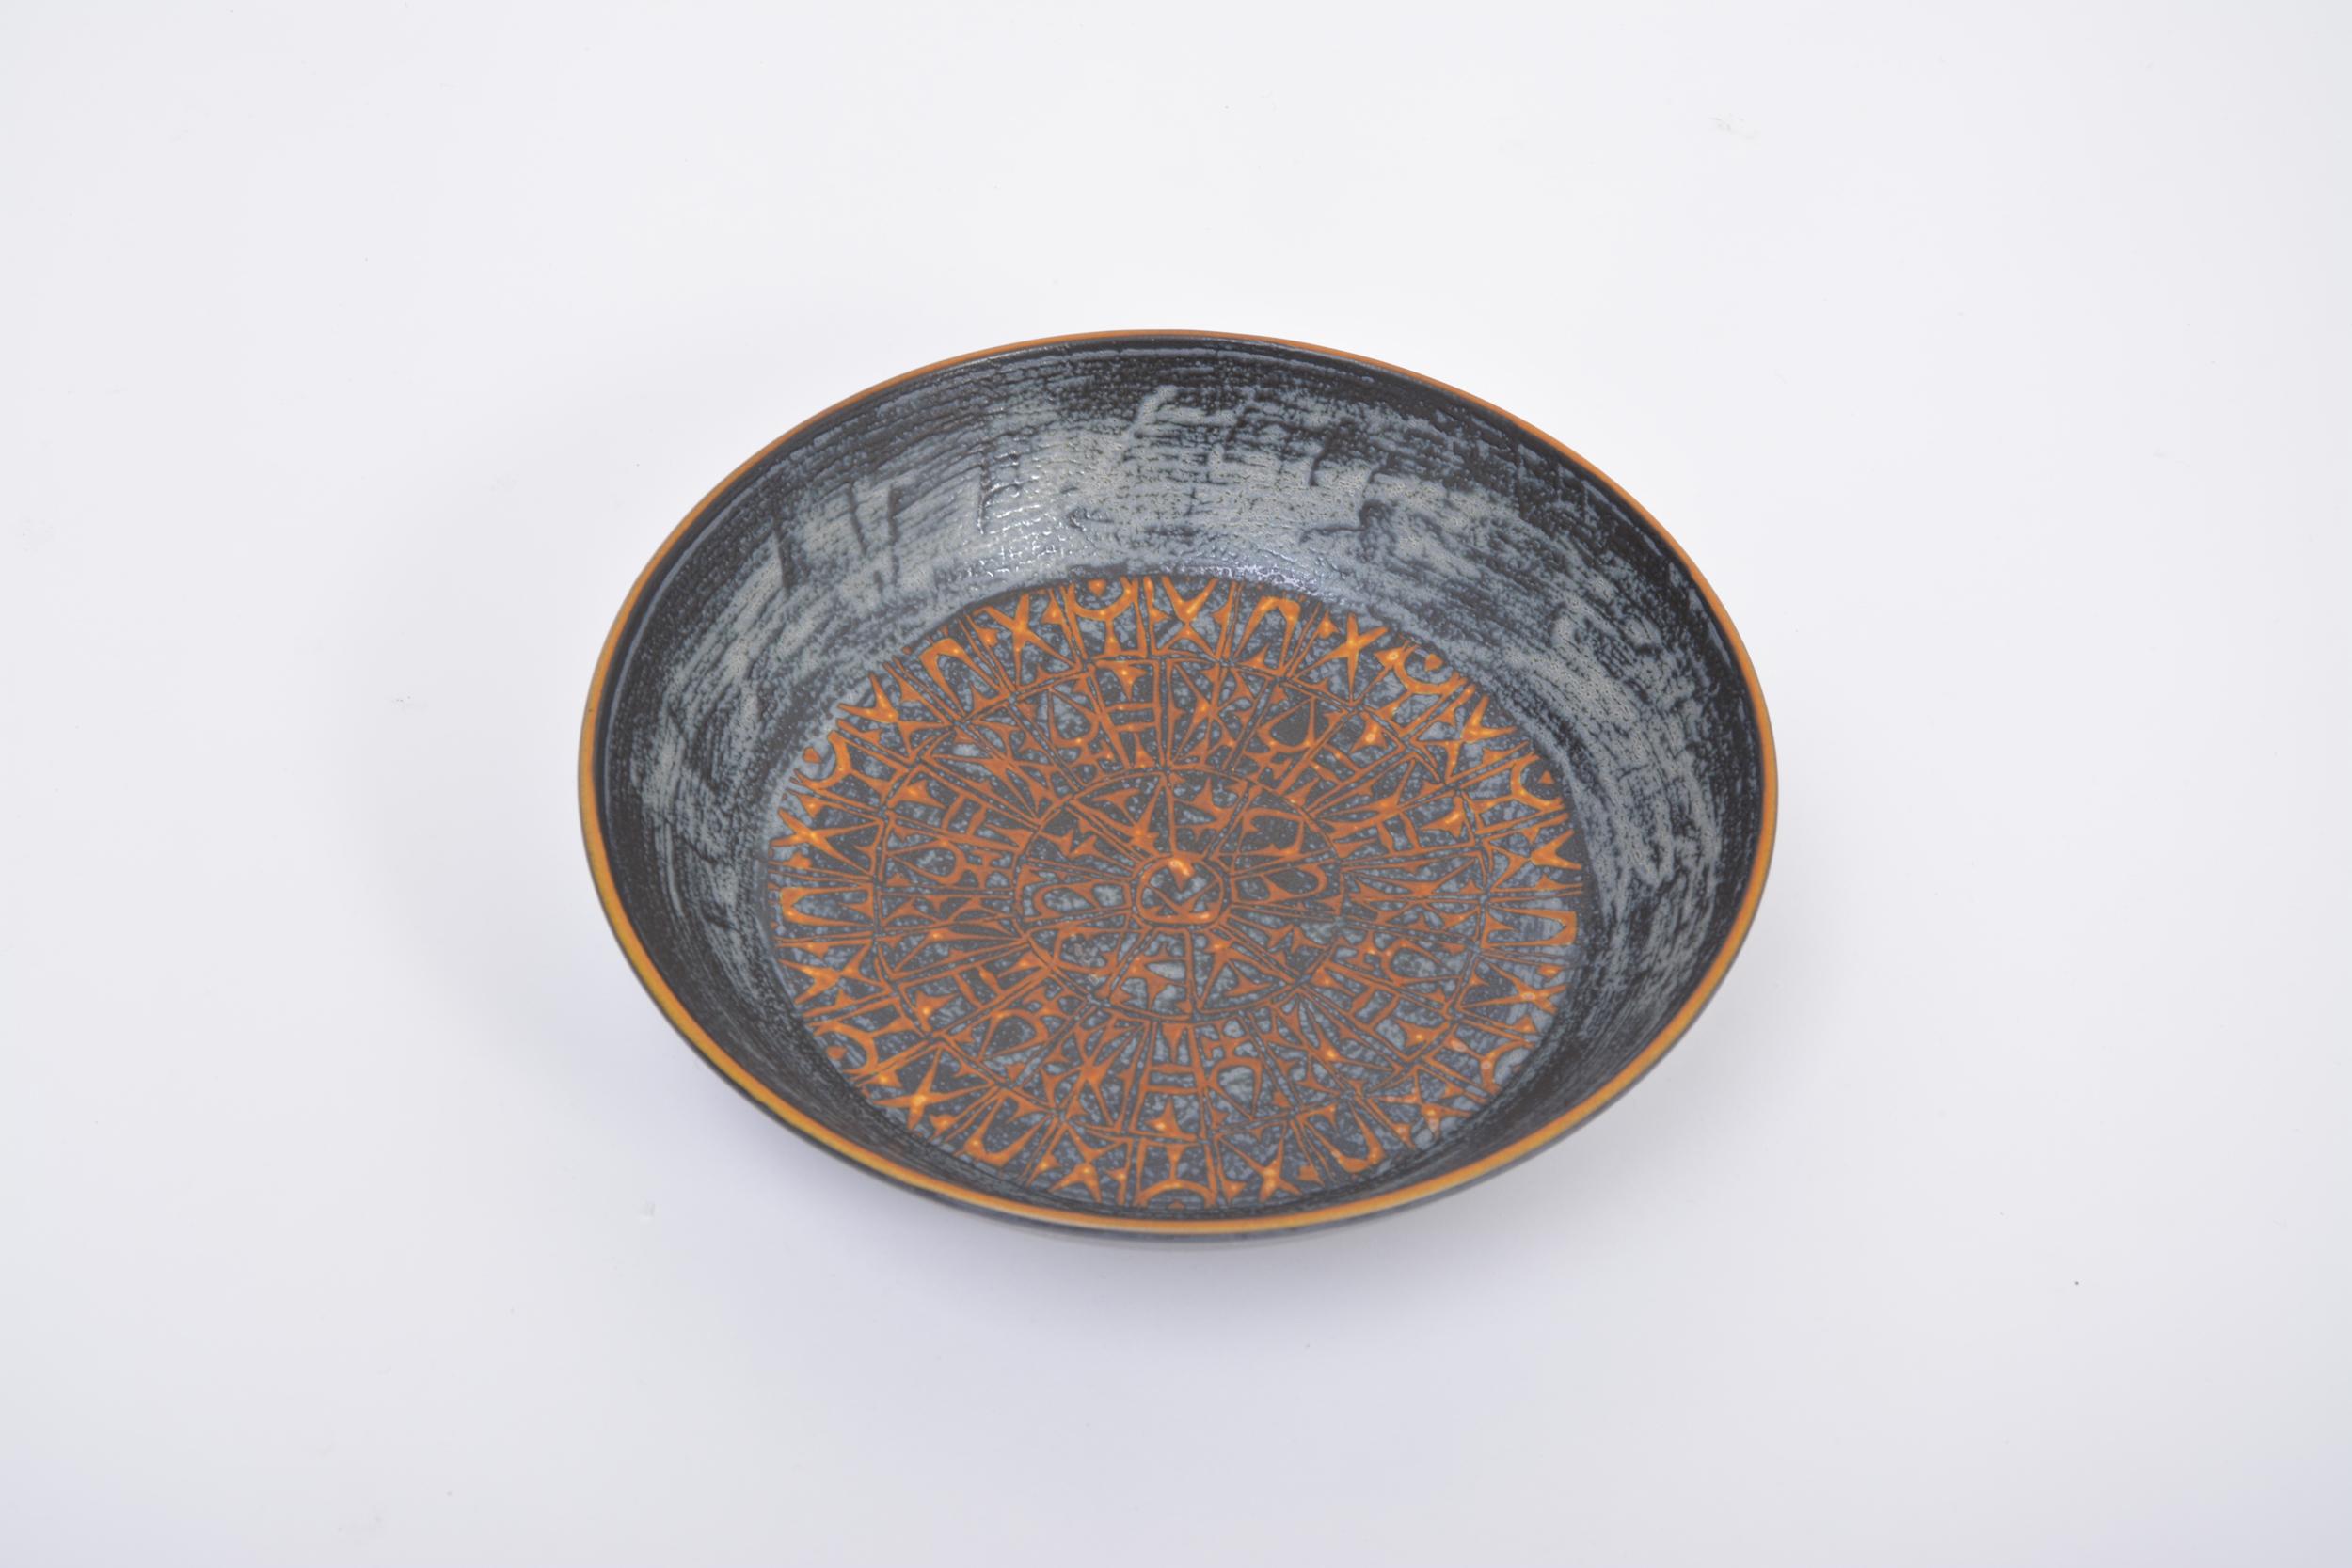 Large midcentury bowl from the Baca series by Nils Thorsson for Aluminia
This highly detailed ceramic/faience bowl is part of Aluminia's / Royal Copenhagen's BACA series, designed by Nils Thorsson (1898-1975) and produced in the 1960s. This